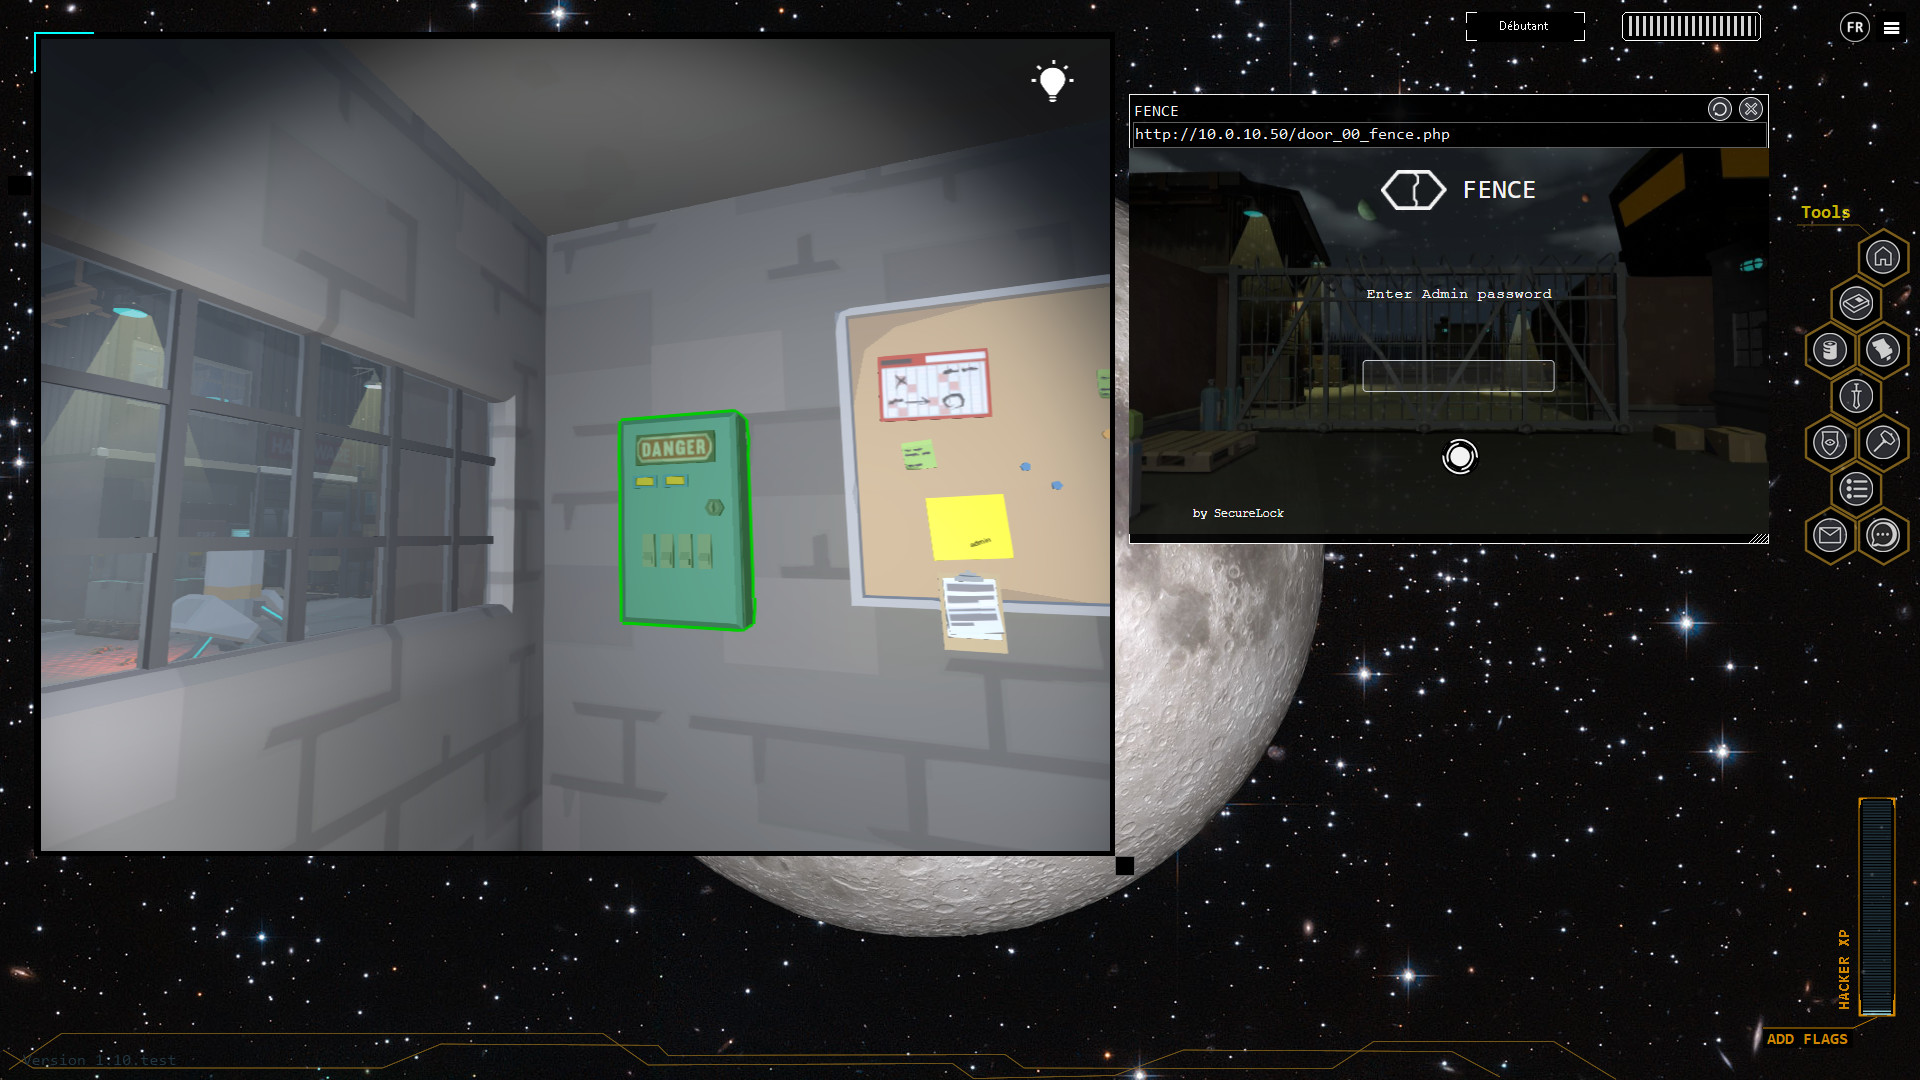 Yolo Space Hacker - Mission Forensic Featured Screenshot #1